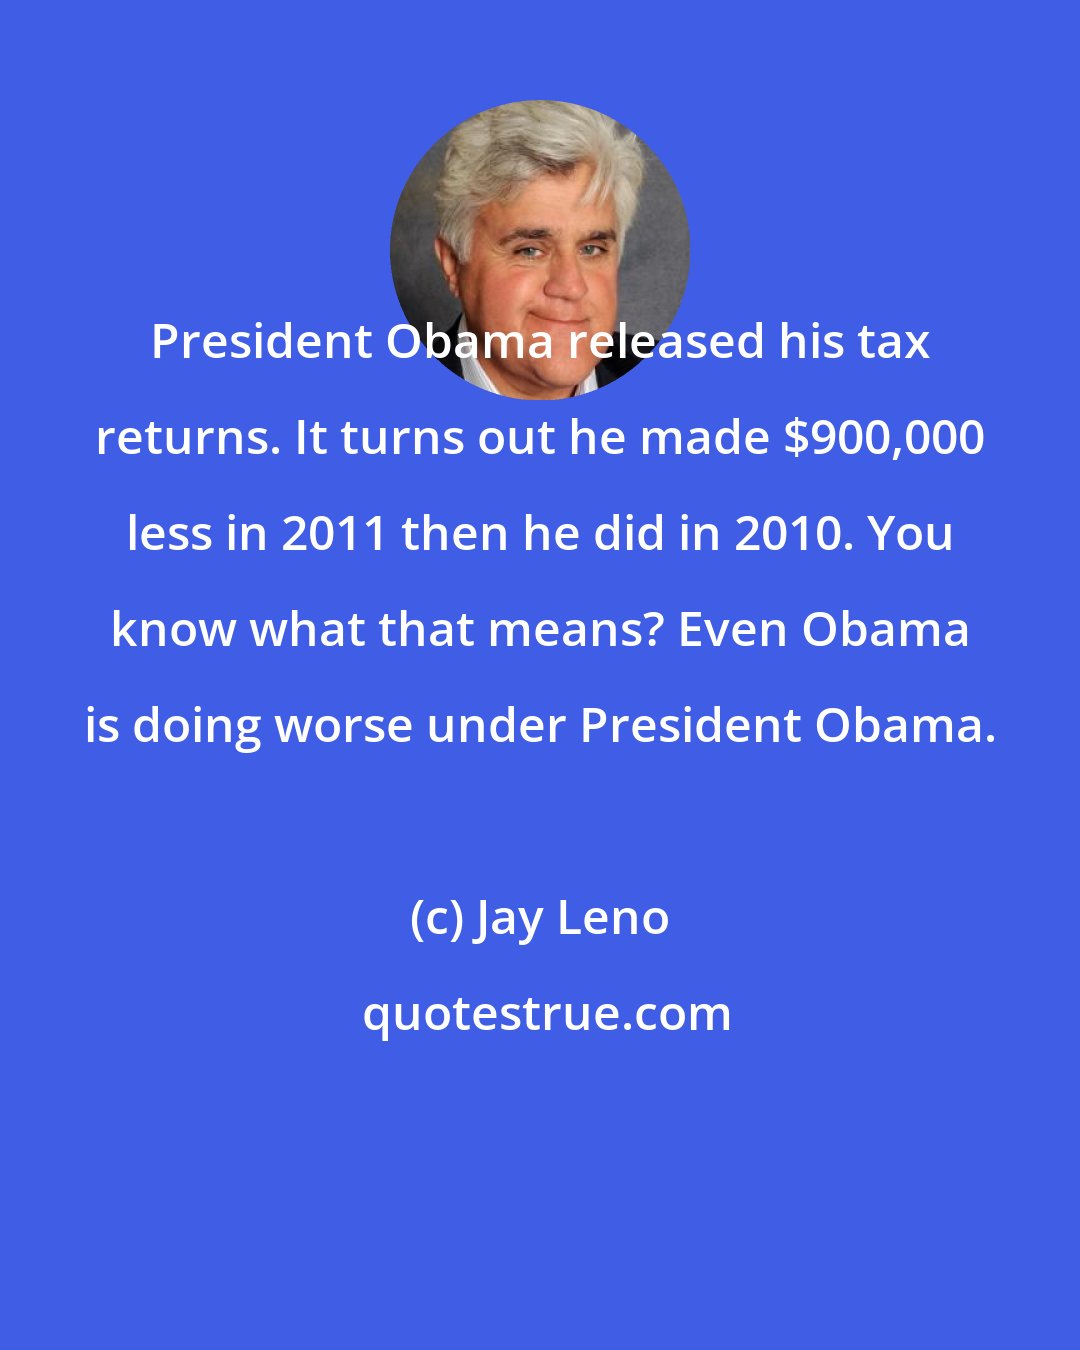 Jay Leno: President Obama released his tax returns. It turns out he made $900,000 less in 2011 then he did in 2010. You know what that means? Even Obama is doing worse under President Obama.